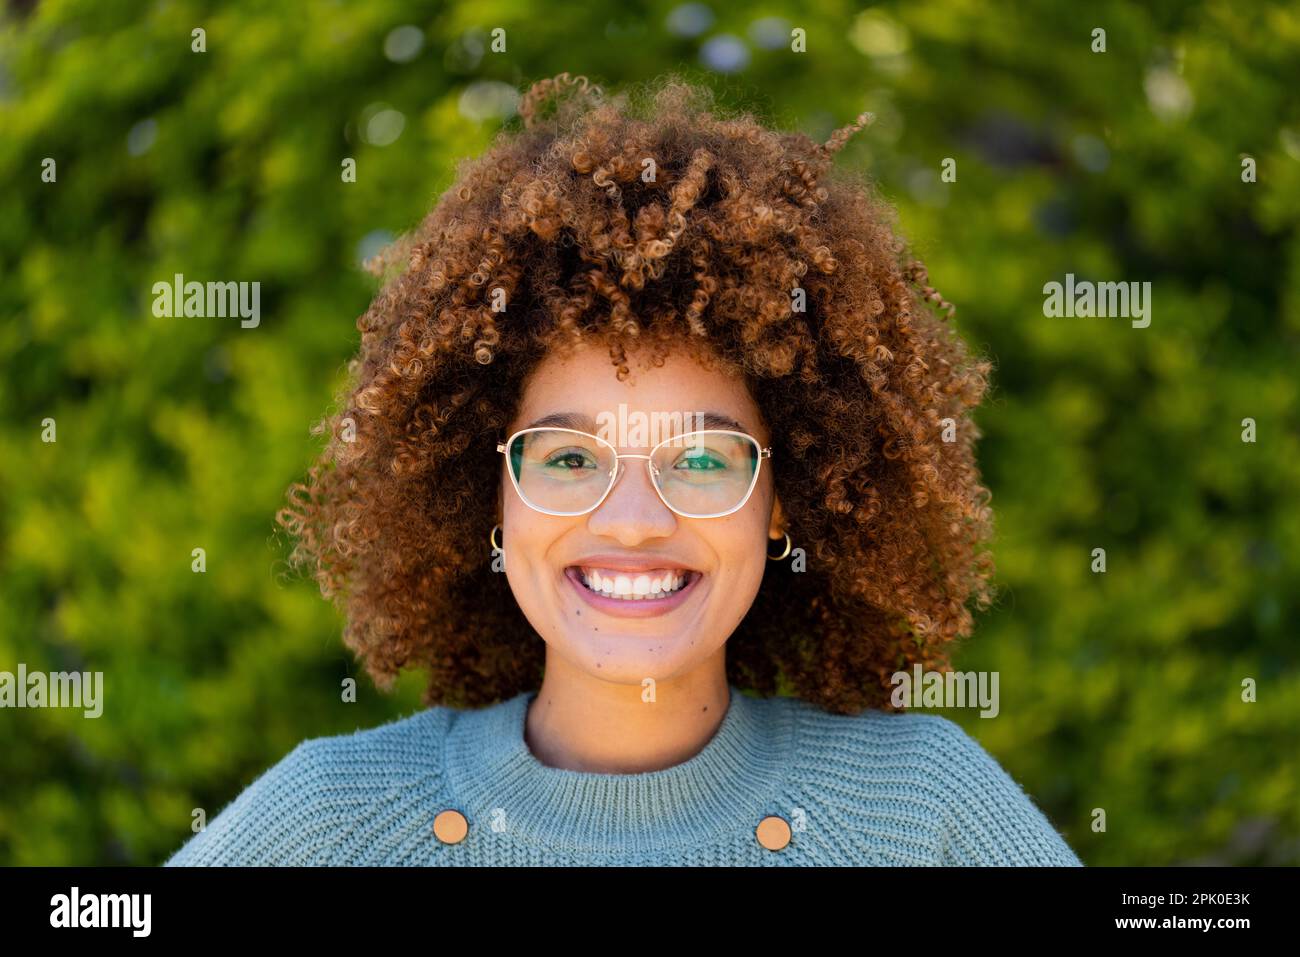 Closeup portrait of biracial beautiful young woman with afro hair smiling against plants in yard Stock Photo